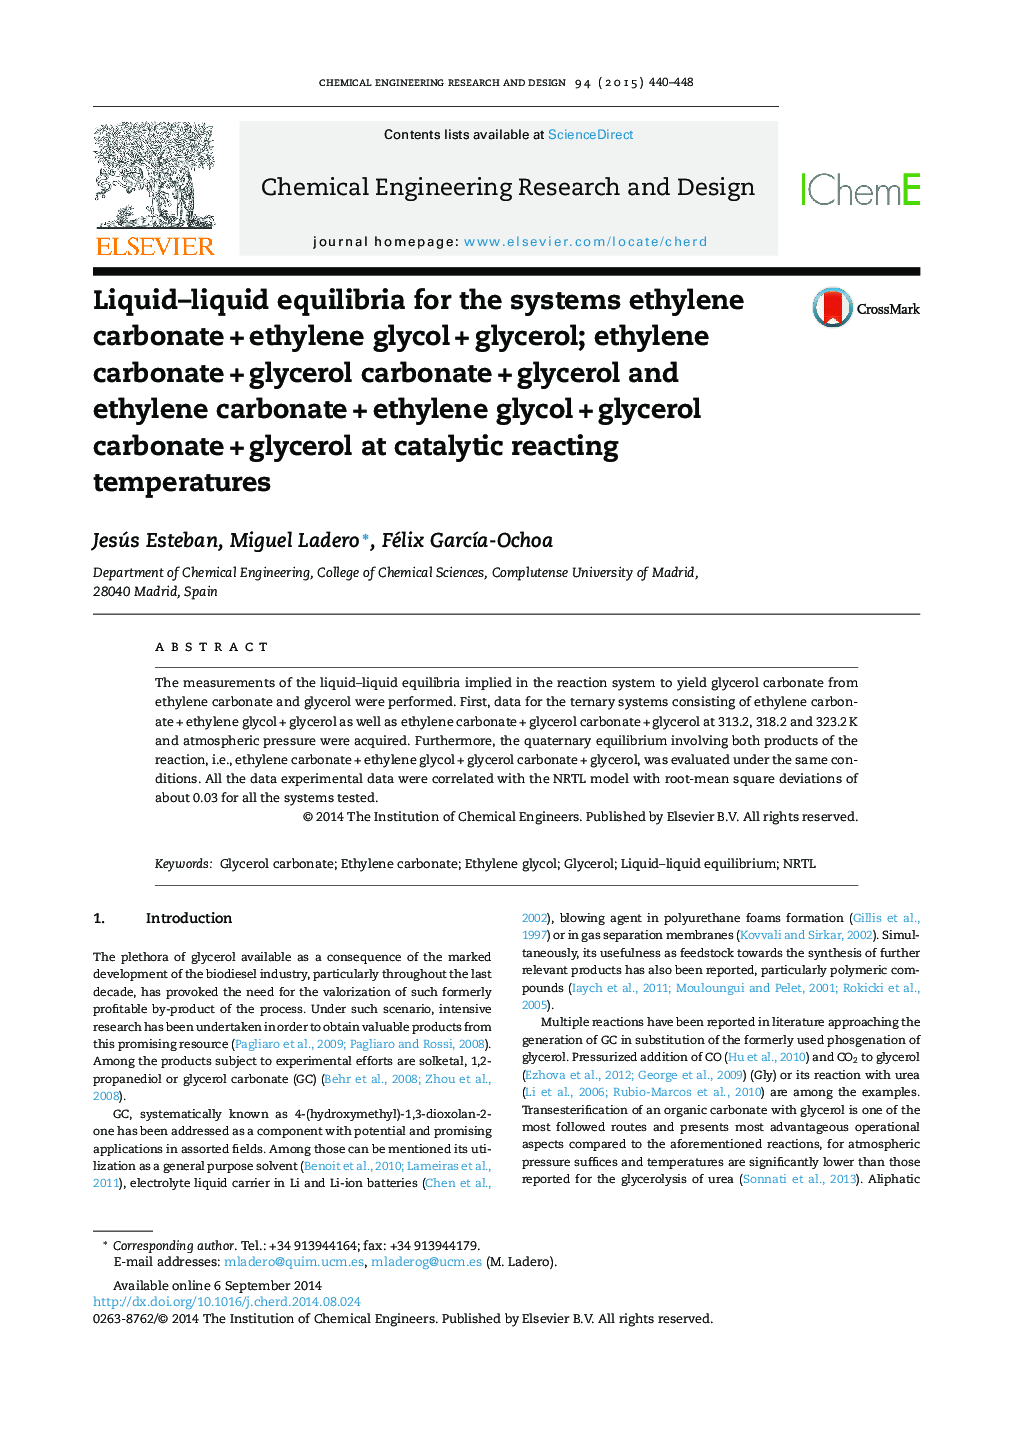 Liquid–liquid equilibria for the systems ethylene carbonate + ethylene glycol + glycerol; ethylene carbonate + glycerol carbonate + glycerol and ethylene carbonate + ethylene glycol + glycerol carbonate + glycerol at catalytic reacting temperatures